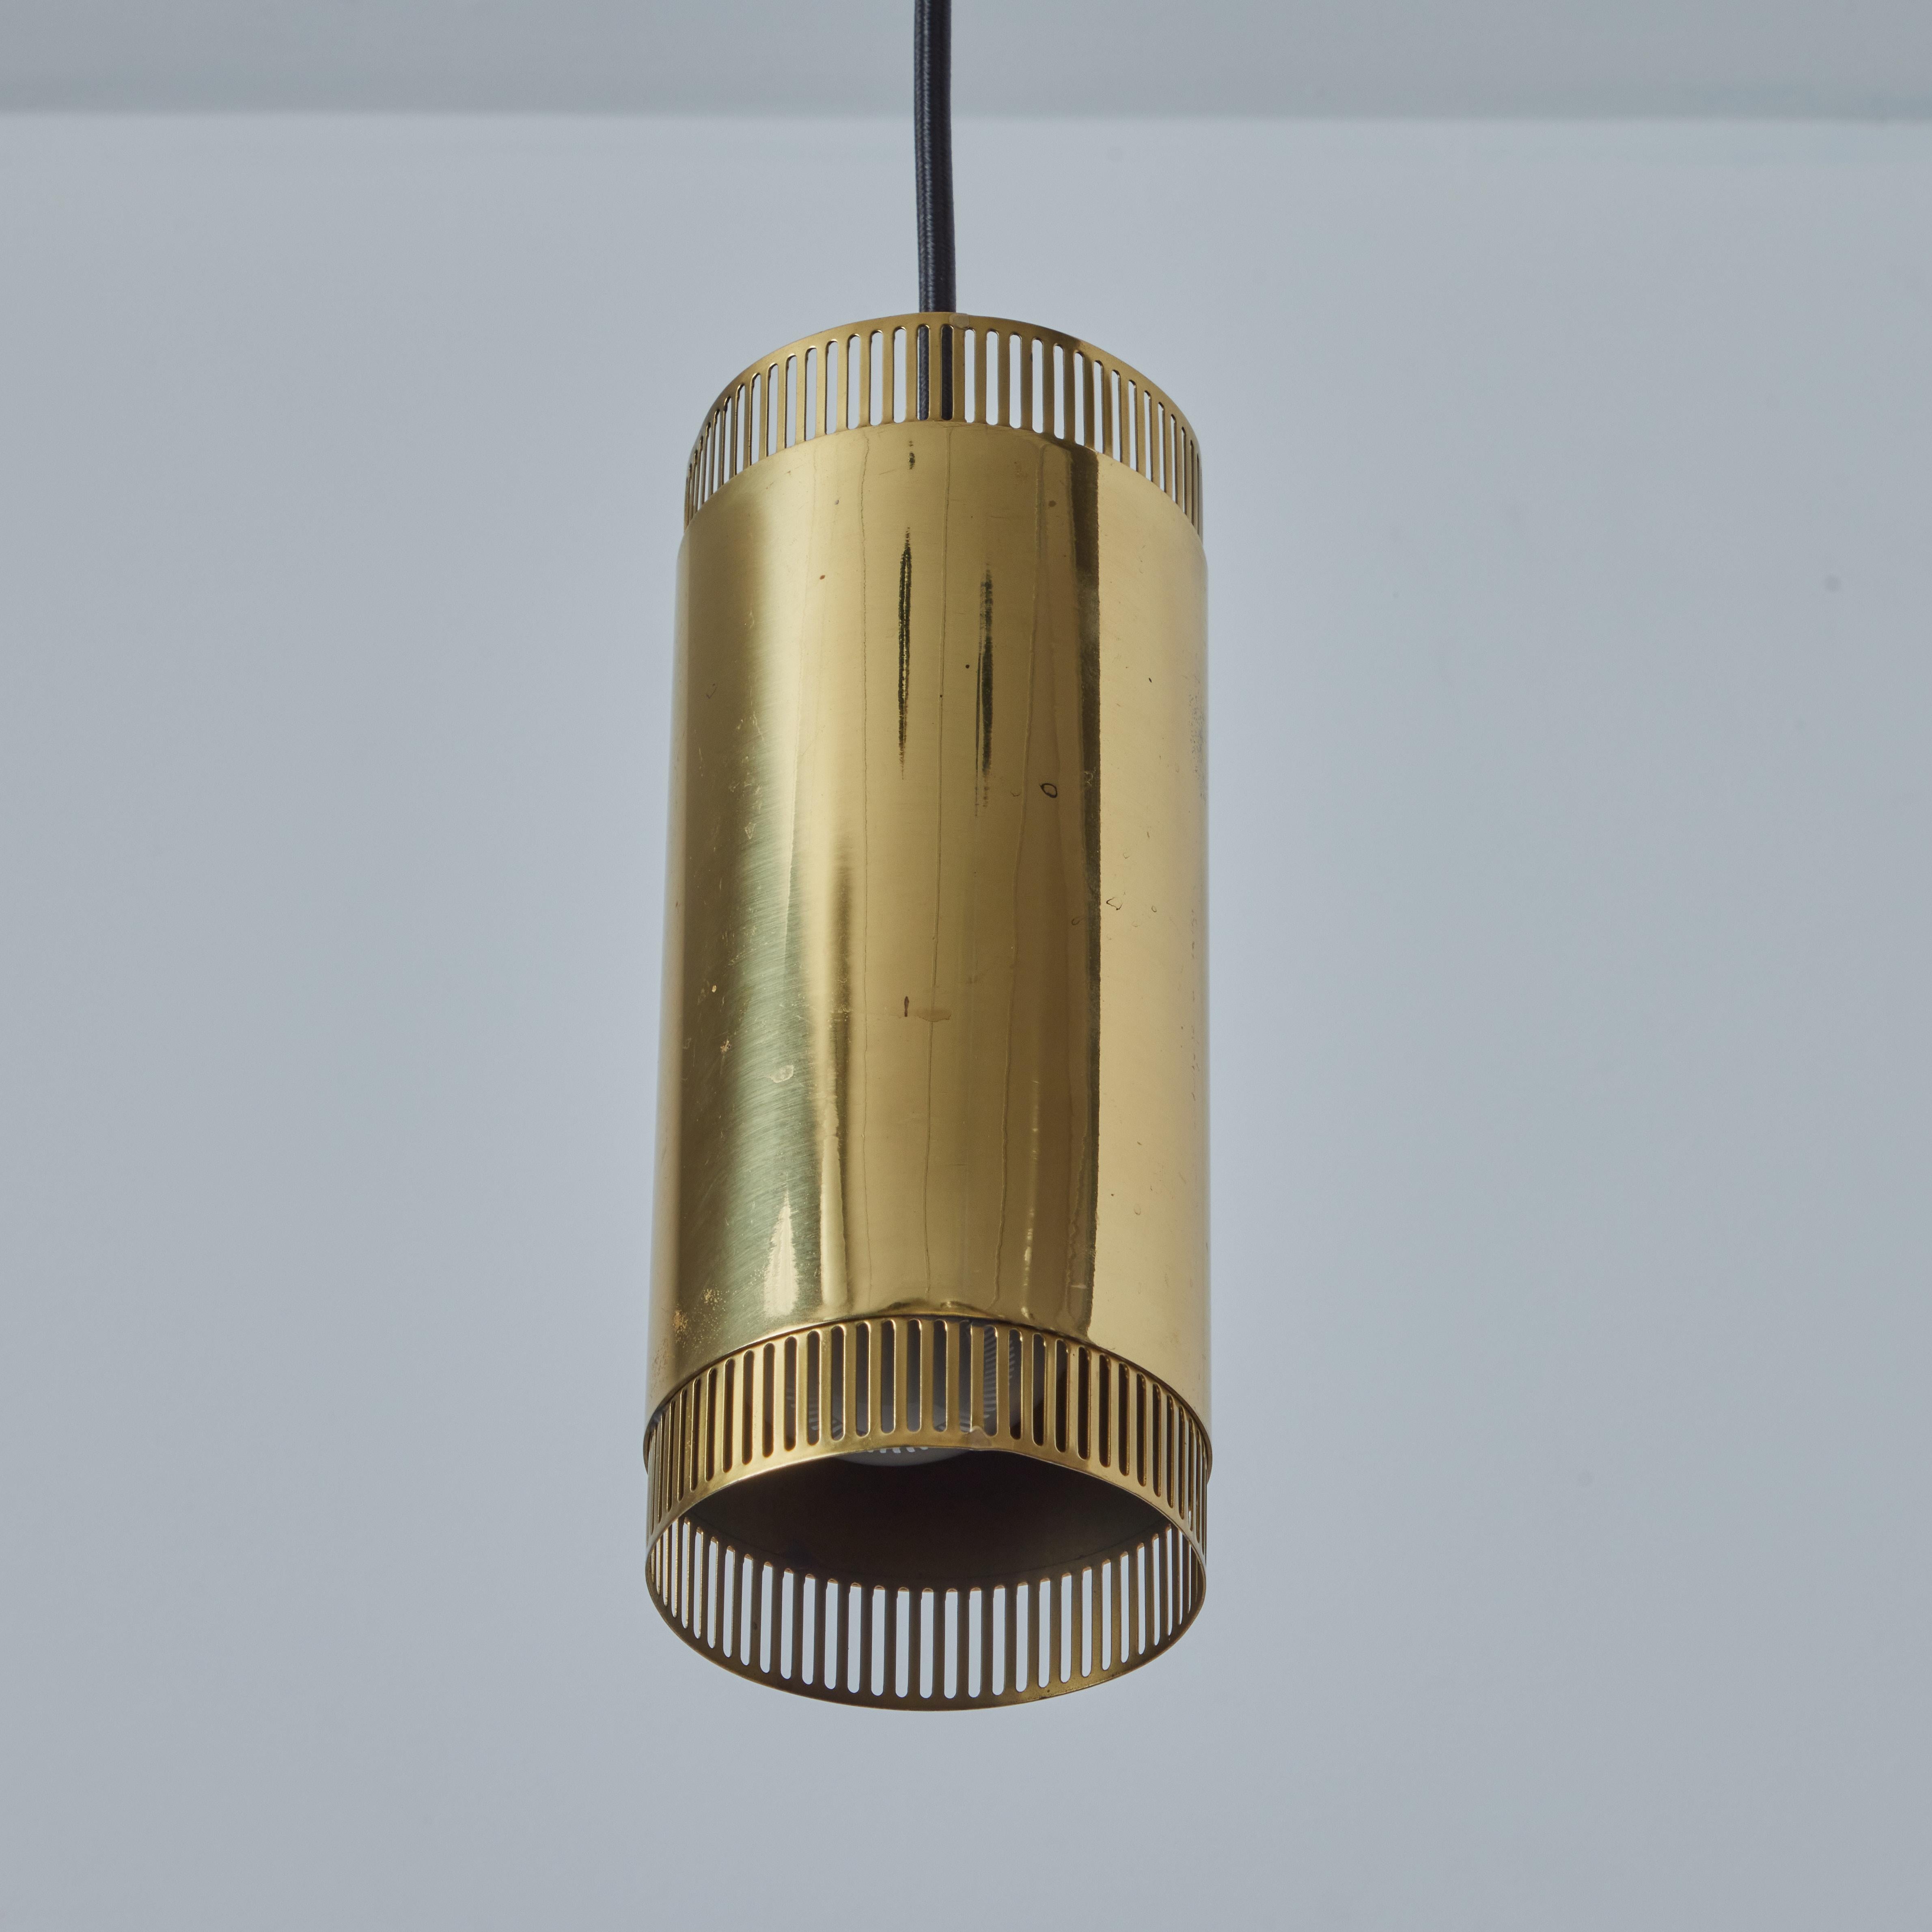 1960s Perforated Brass Cylindrical Pendant Attributed to Mauri Almari for Idman In Good Condition For Sale In Glendale, CA